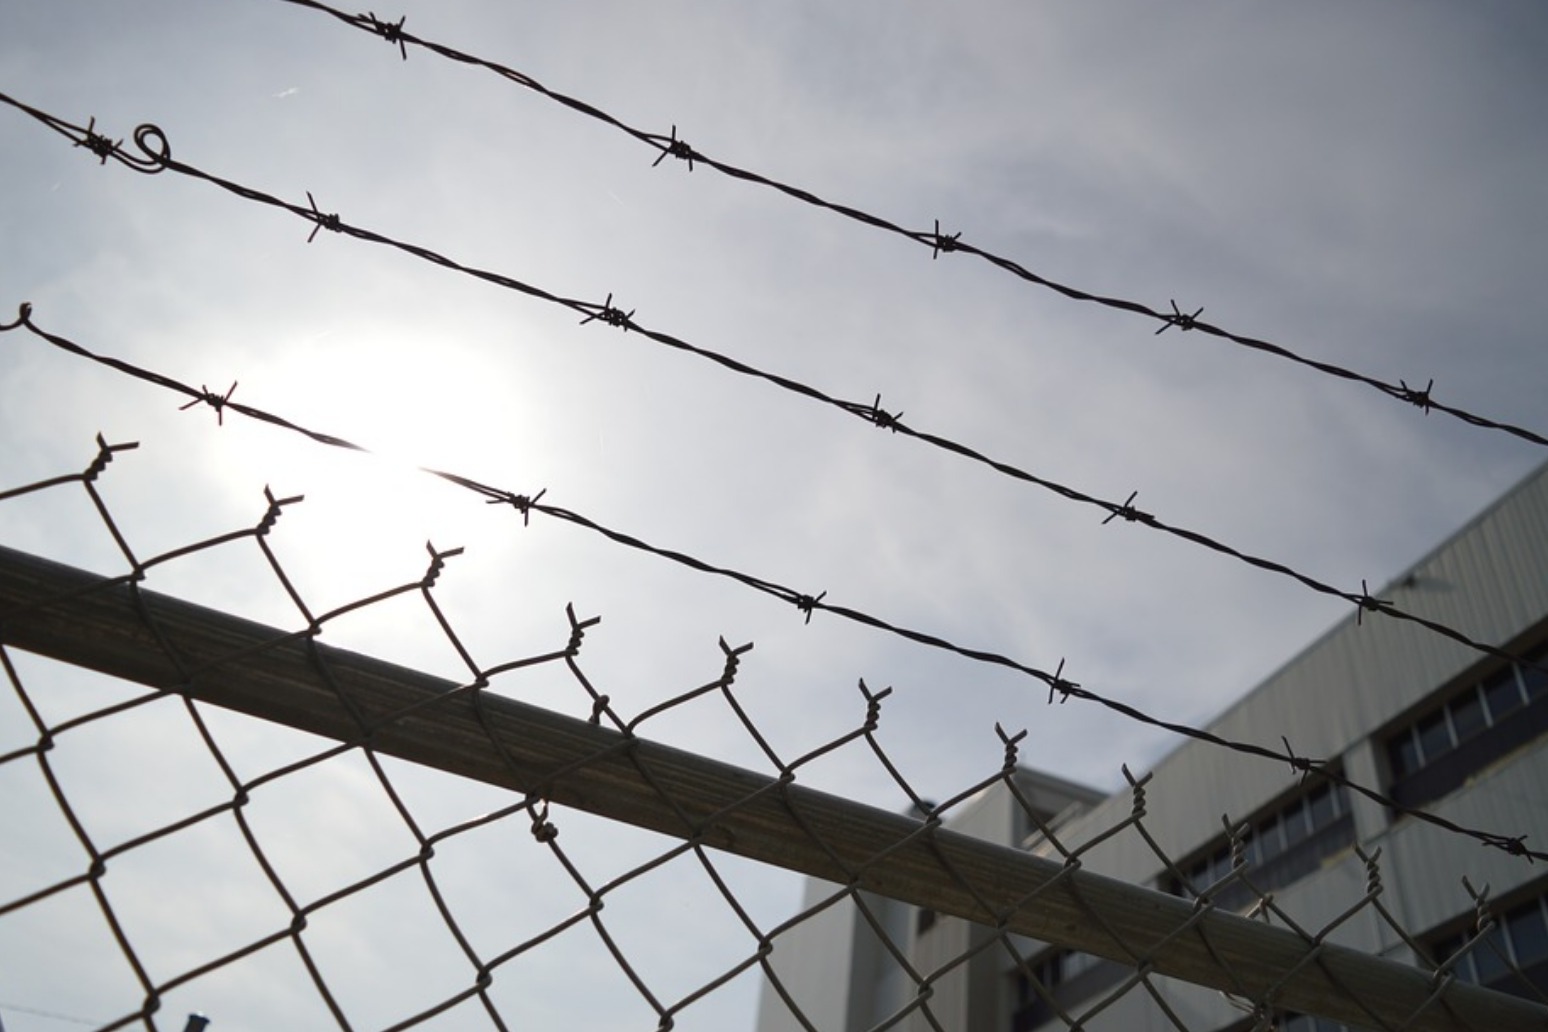 100 million pounds to be invested in prison security 